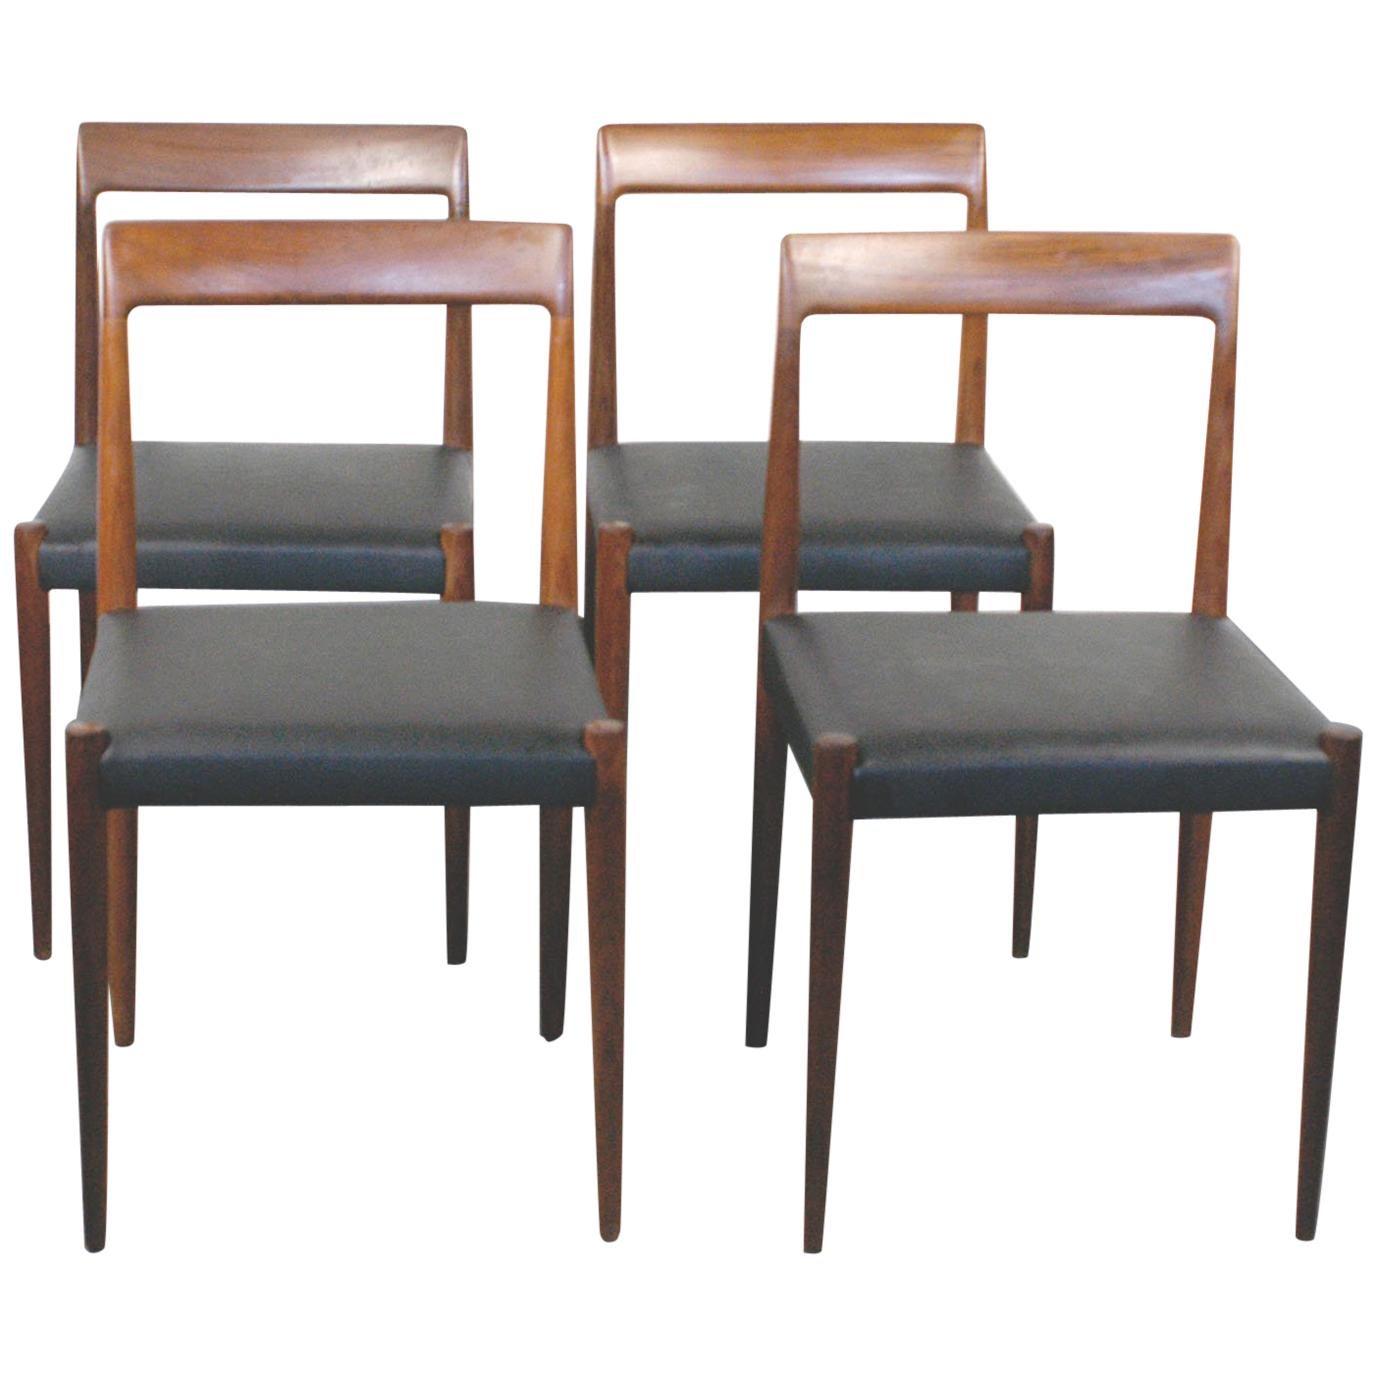 Set of Four Teak Dining Chairs by Lübke, Germany, 1960s